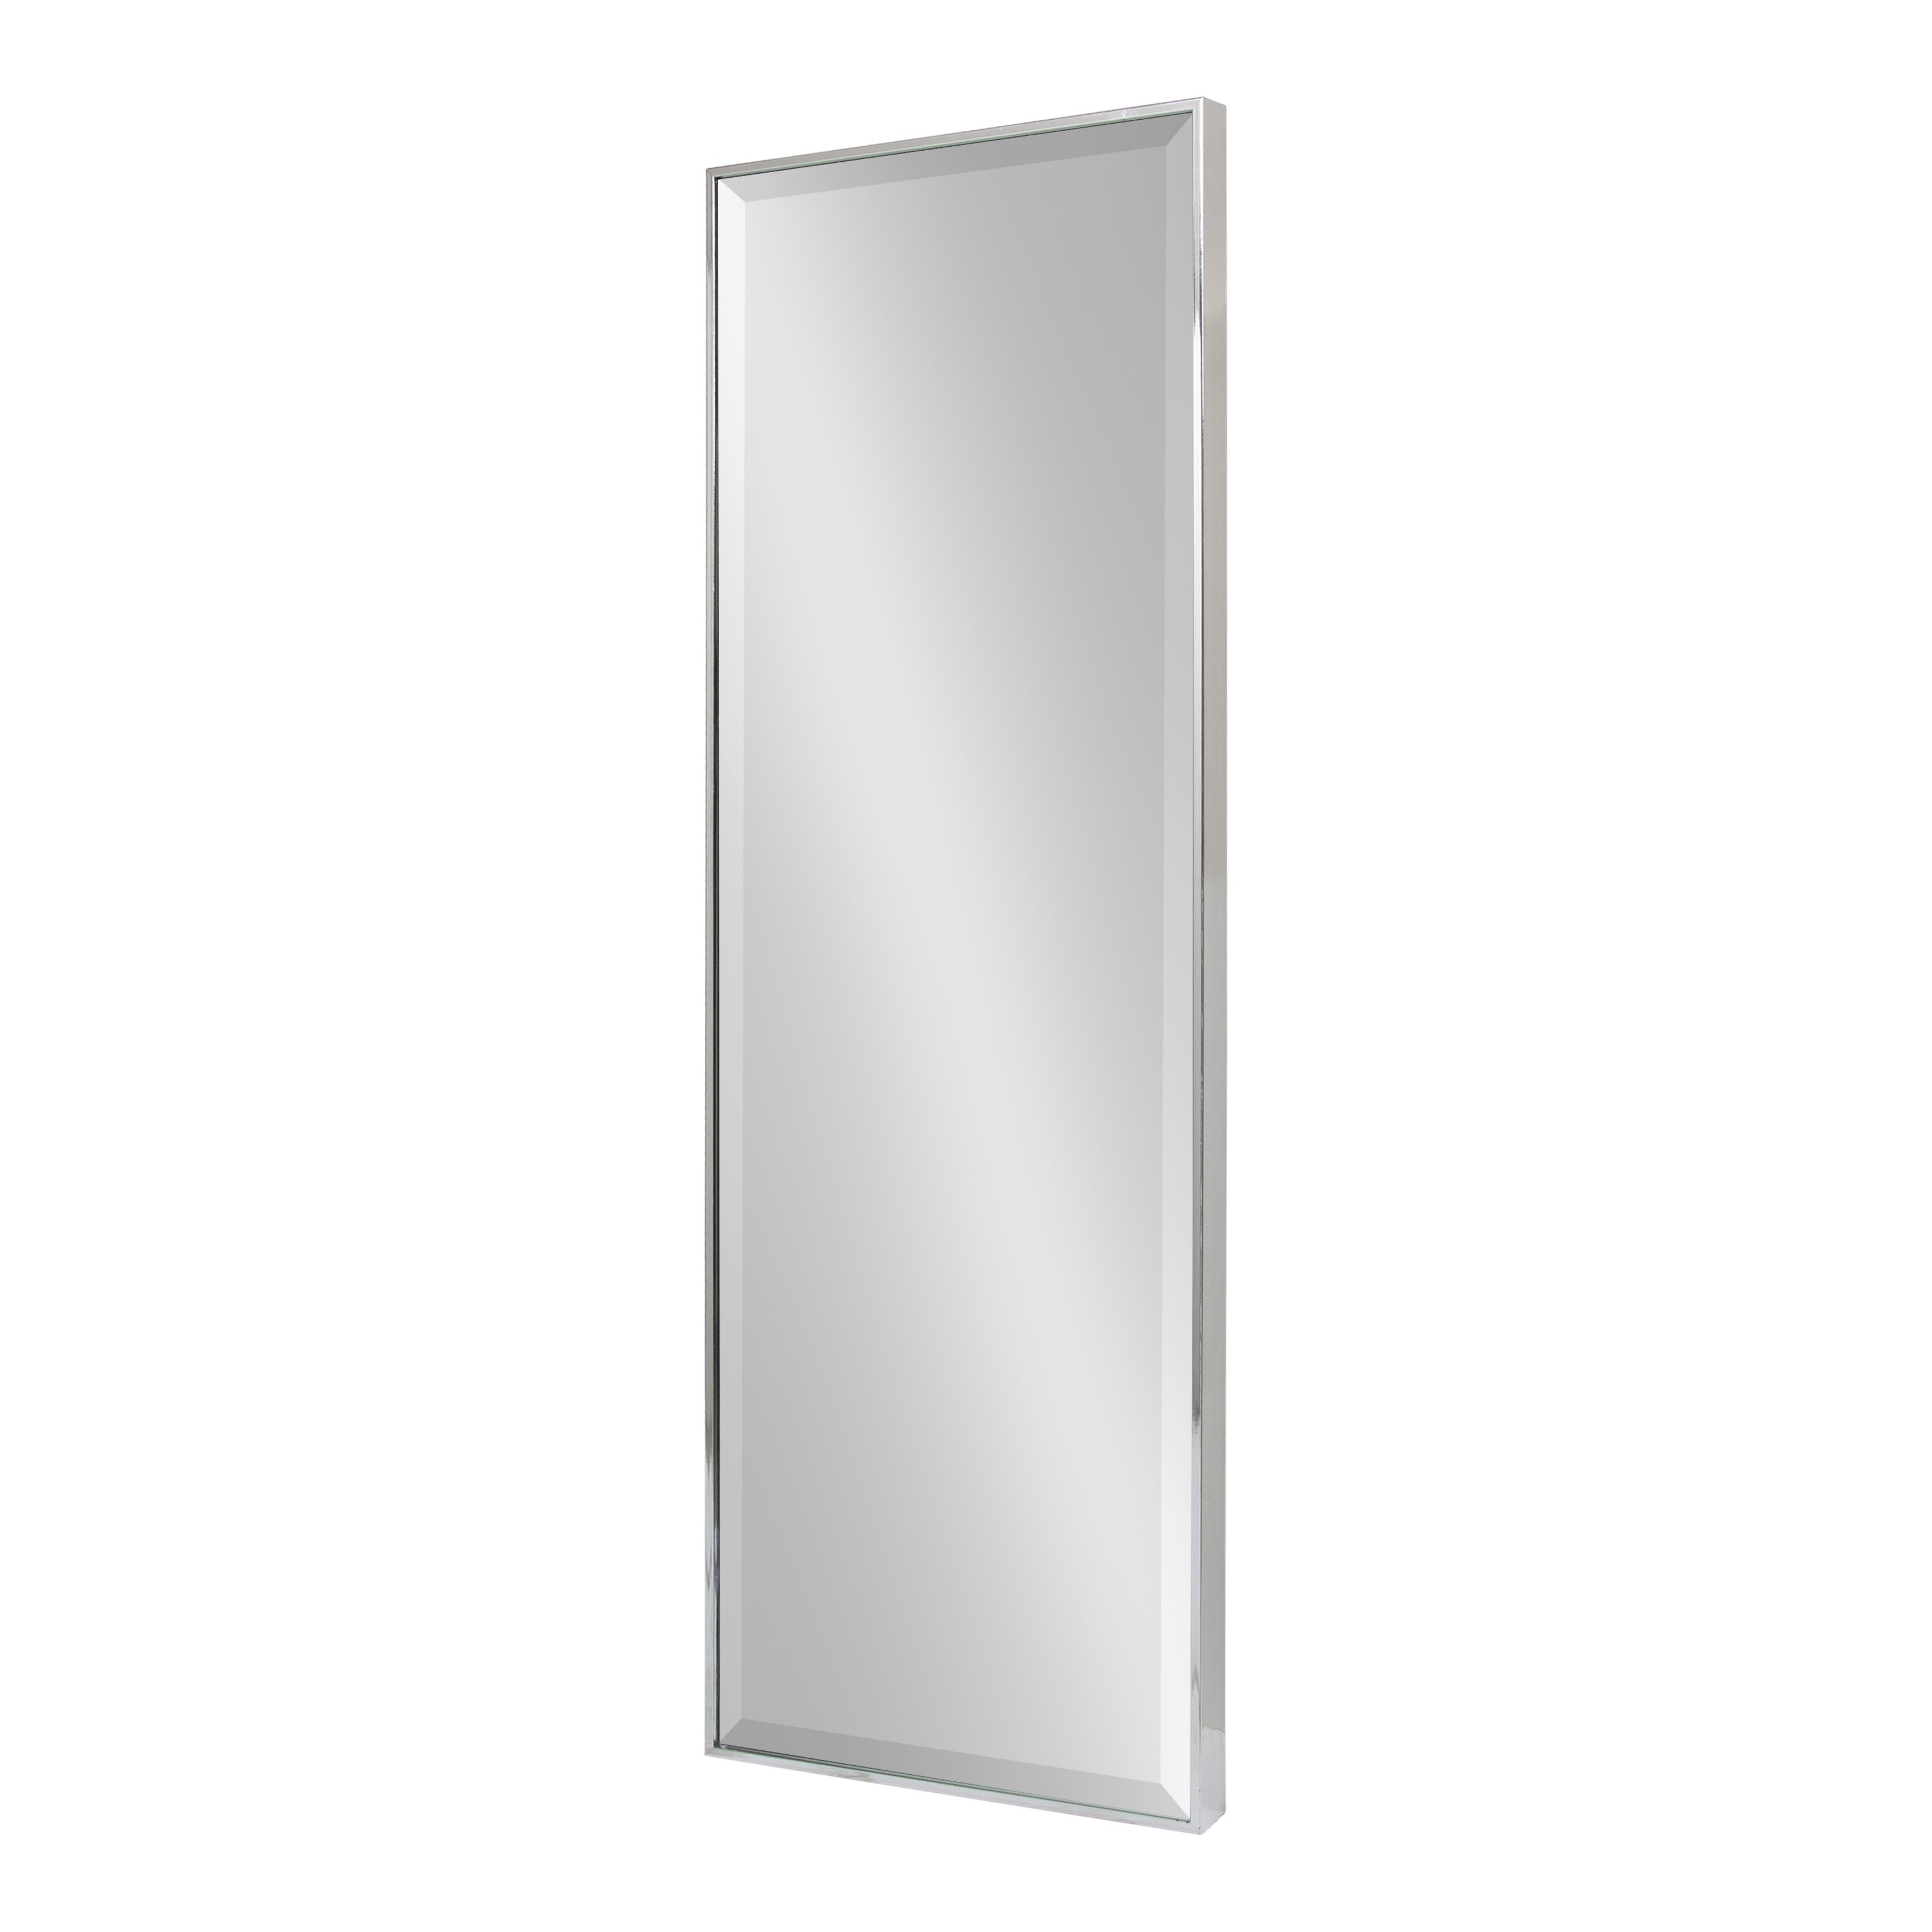 Well Liked Decorative Full Length Wall Mirrors Throughout Kate And Laurel Rhodes Decorative Frame Full Length Wall Mirror,  16.75x48. (View 19 of 20)